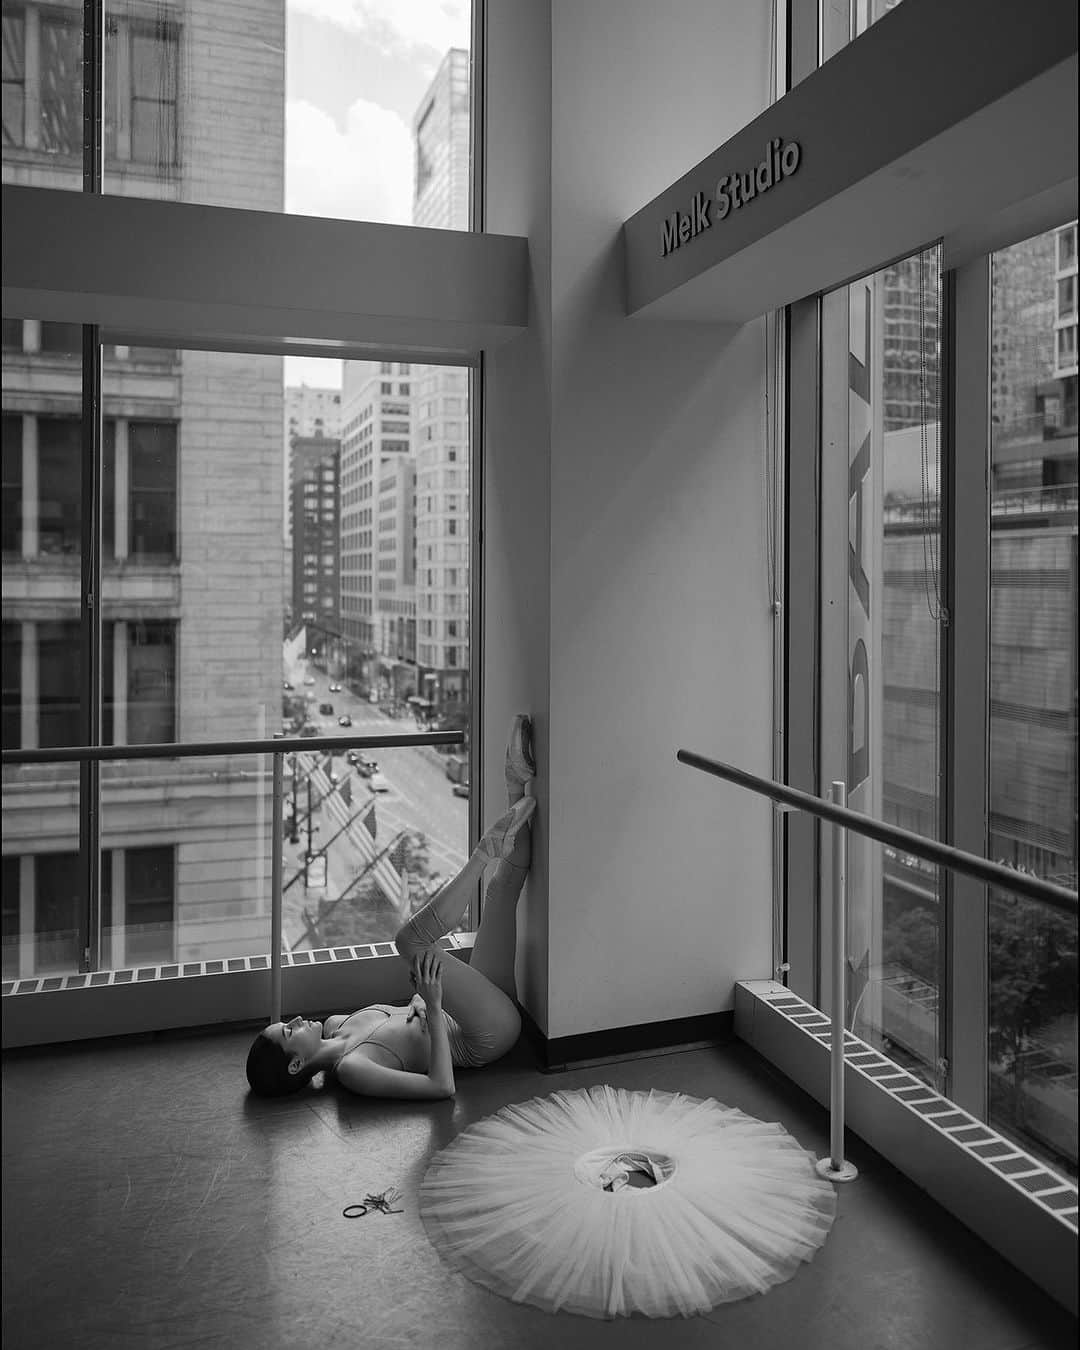 ballerina projectさんのインスタグラム写真 - (ballerina projectInstagram)「𝐁𝐚𝐬𝐢𝐚 𝐑𝐡𝐨𝐝𝐞𝐧 at Joffrey Ballet in Chicago.   @basia.rhoden #basiarhoden #ballerinaproject #joffreyballet #chicago #ballerina #ballet #balletstudio #barre #tutu   Ballerina Project 𝗹𝗮𝗿𝗴𝗲 𝗳𝗼𝗿𝗺𝗮𝘁 𝗹𝗶𝗺𝗶𝘁𝗲𝗱 𝗲𝗱𝘁𝗶𝗼𝗻 𝗽𝗿𝗶𝗻𝘁𝘀 and 𝗜𝗻𝘀𝘁𝗮𝘅 𝗰𝗼𝗹𝗹𝗲𝗰𝘁𝗶𝗼𝗻𝘀 on sale in our Etsy store. Link is located in our bio.  𝙎𝙪𝙗𝙨𝙘𝙧𝙞𝙗𝙚 to the 𝐁𝐚𝐥𝐥𝐞𝐫𝐢𝐧𝐚 𝐏𝐫𝐨𝐣𝐞𝐜𝐭 on Instagram to have access to exclusive and never seen before content. 🩰」10月25日 21時40分 - ballerinaproject_